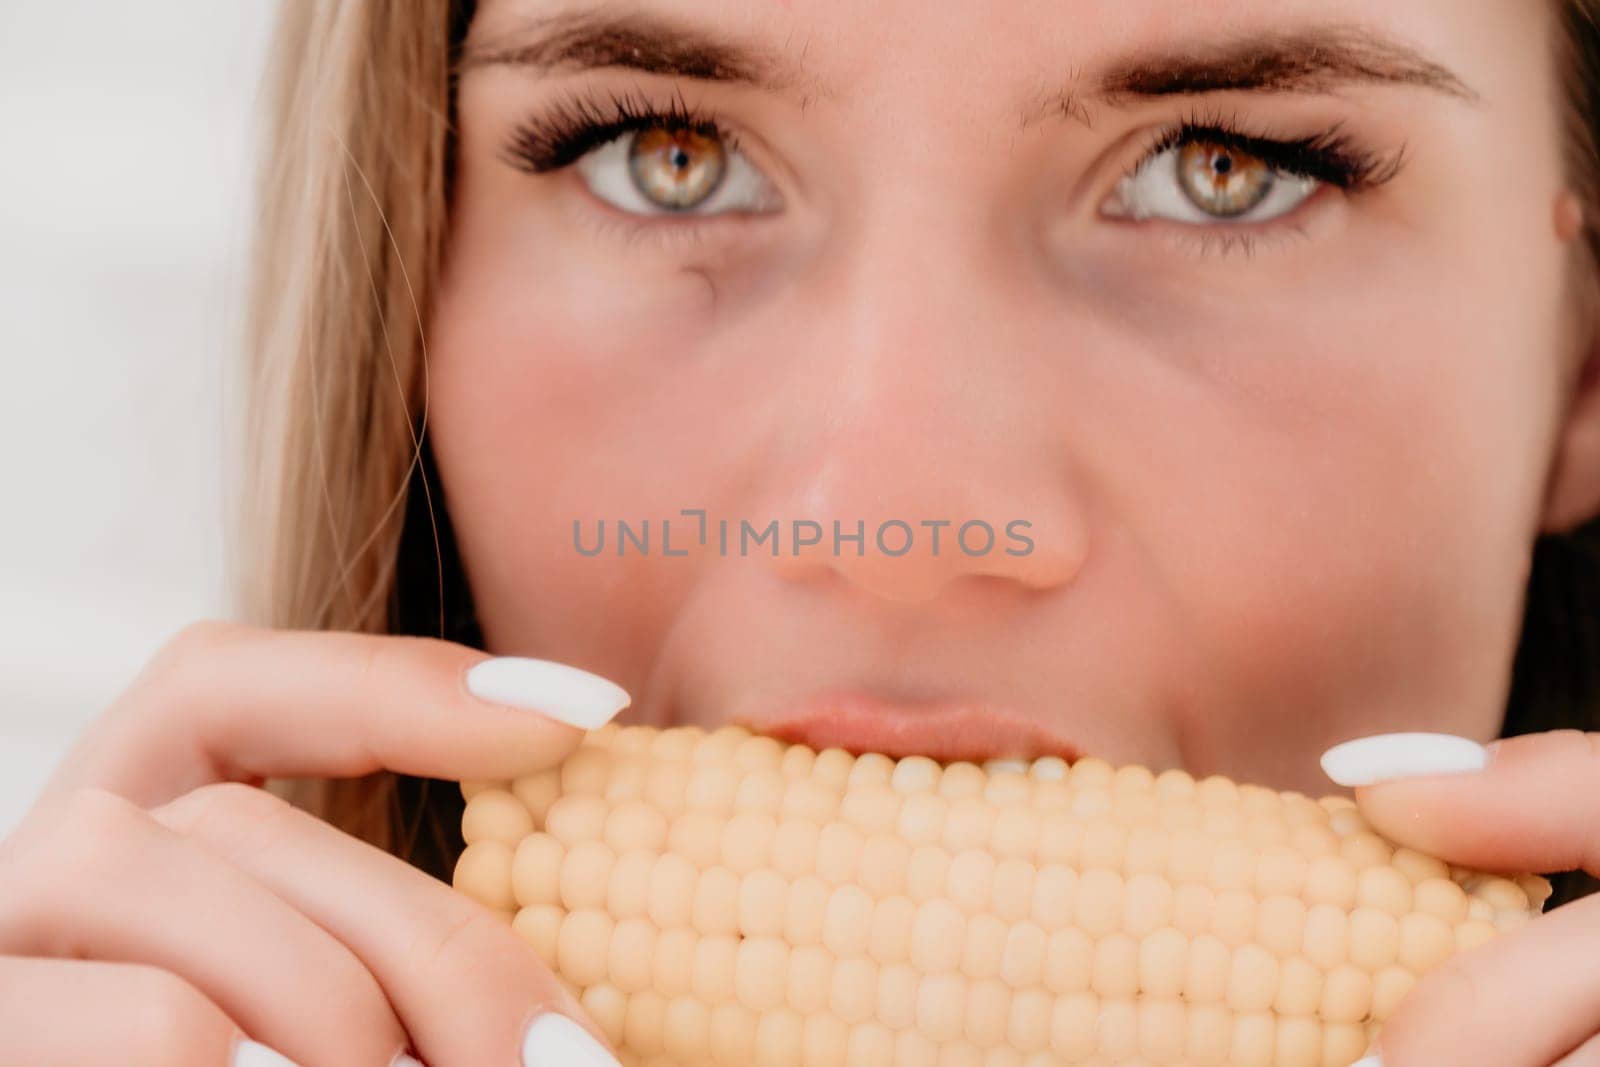 Woman eats corn on beach. Vegetarian hipster woman eat fresh organic grilled corn. Happy lady on sea beach sunset or ocean sunrise. Travel, explore, active yoga and meditation lifestyle concept. by panophotograph